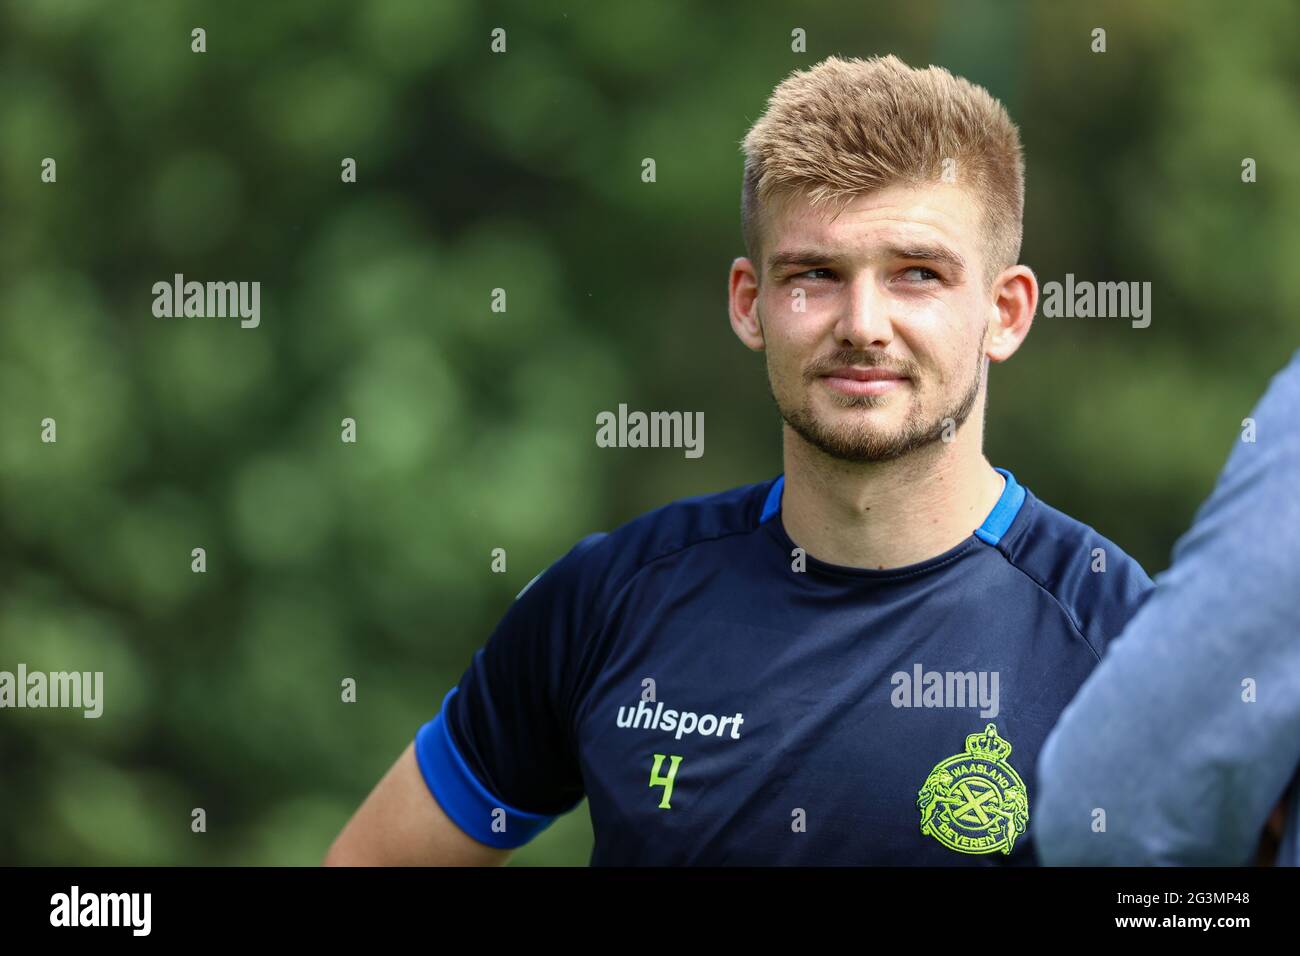 Waasland-Beveren's Georges Mandjeck pictured during the first training session for the new season 2021-2022 of Jupiler Pro League first division socce Stock Photo